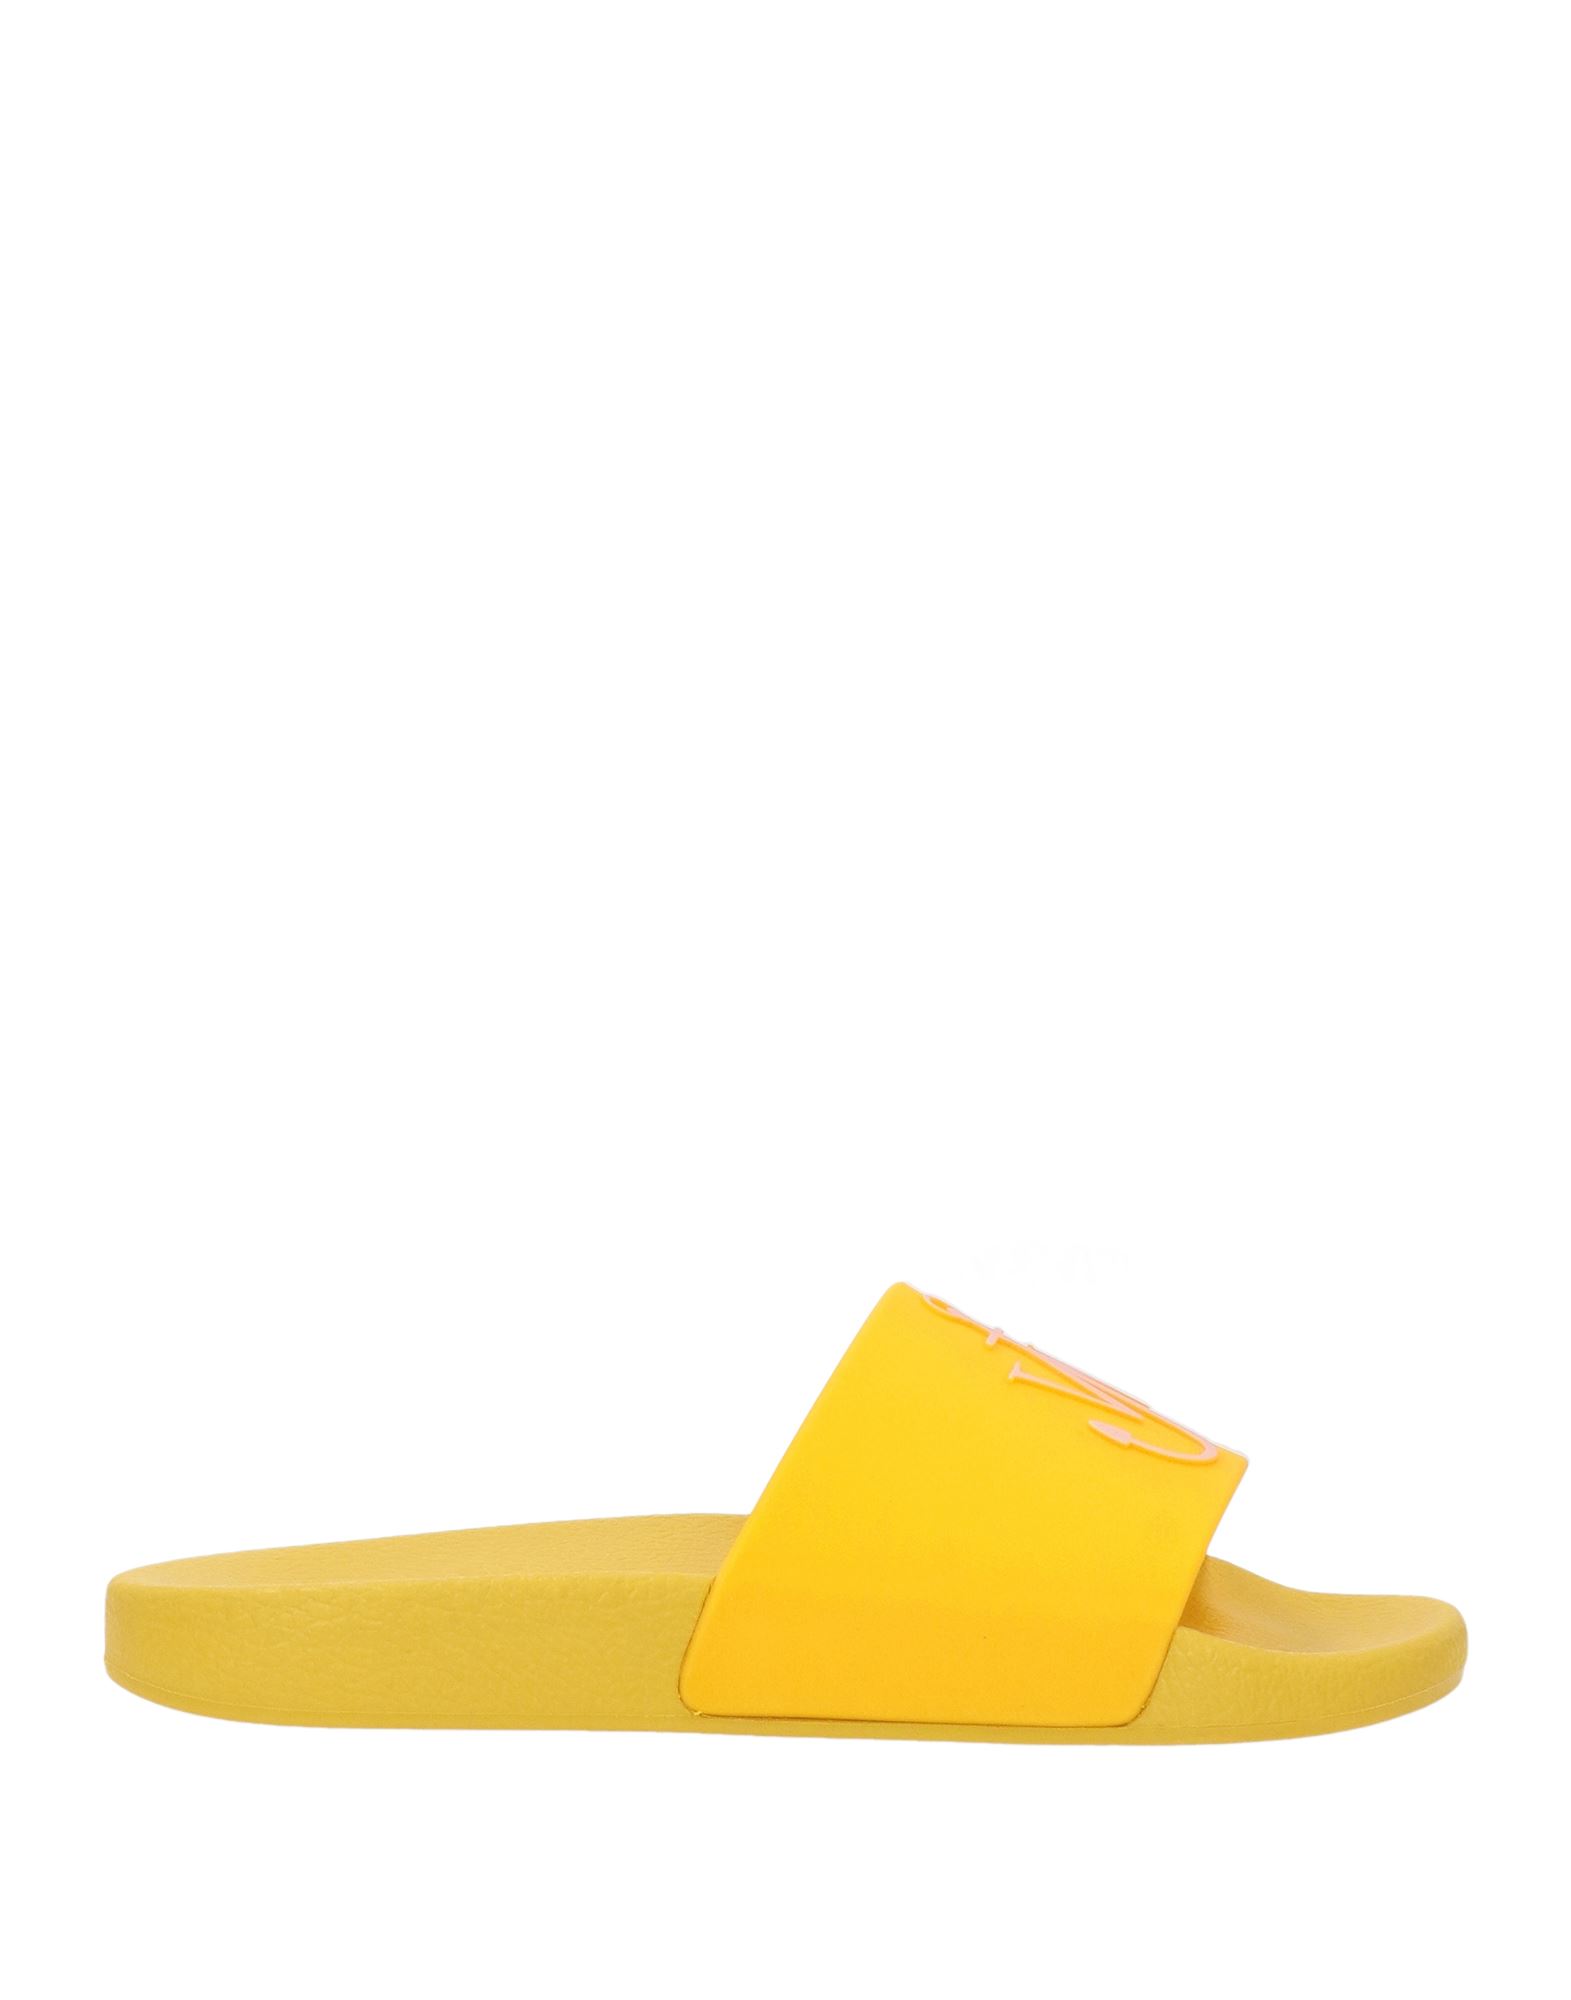 Shop Jw Anderson Woman Sandals Yellow Size 6 Rubber